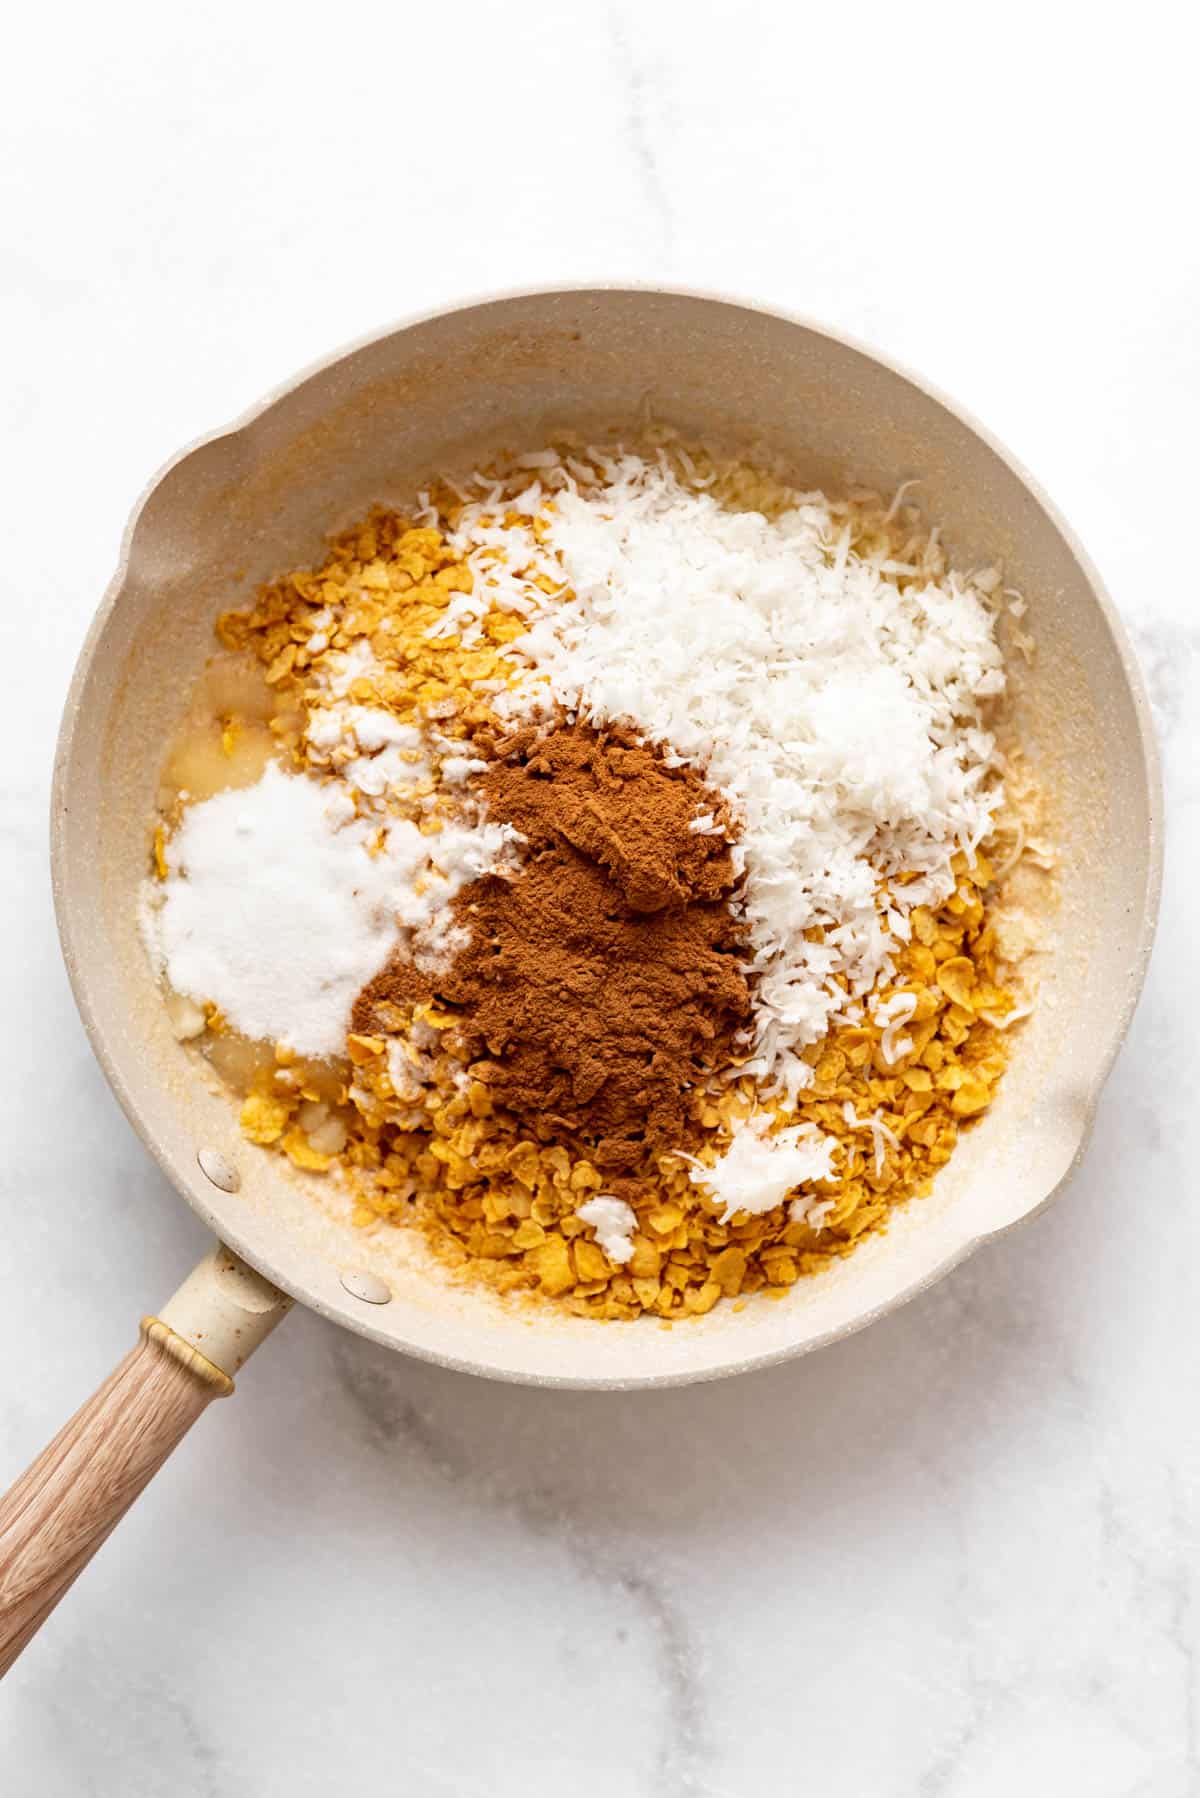 Melted butter, crushed cornflakes, sugar, cinnamon, and coconut in a skillet.